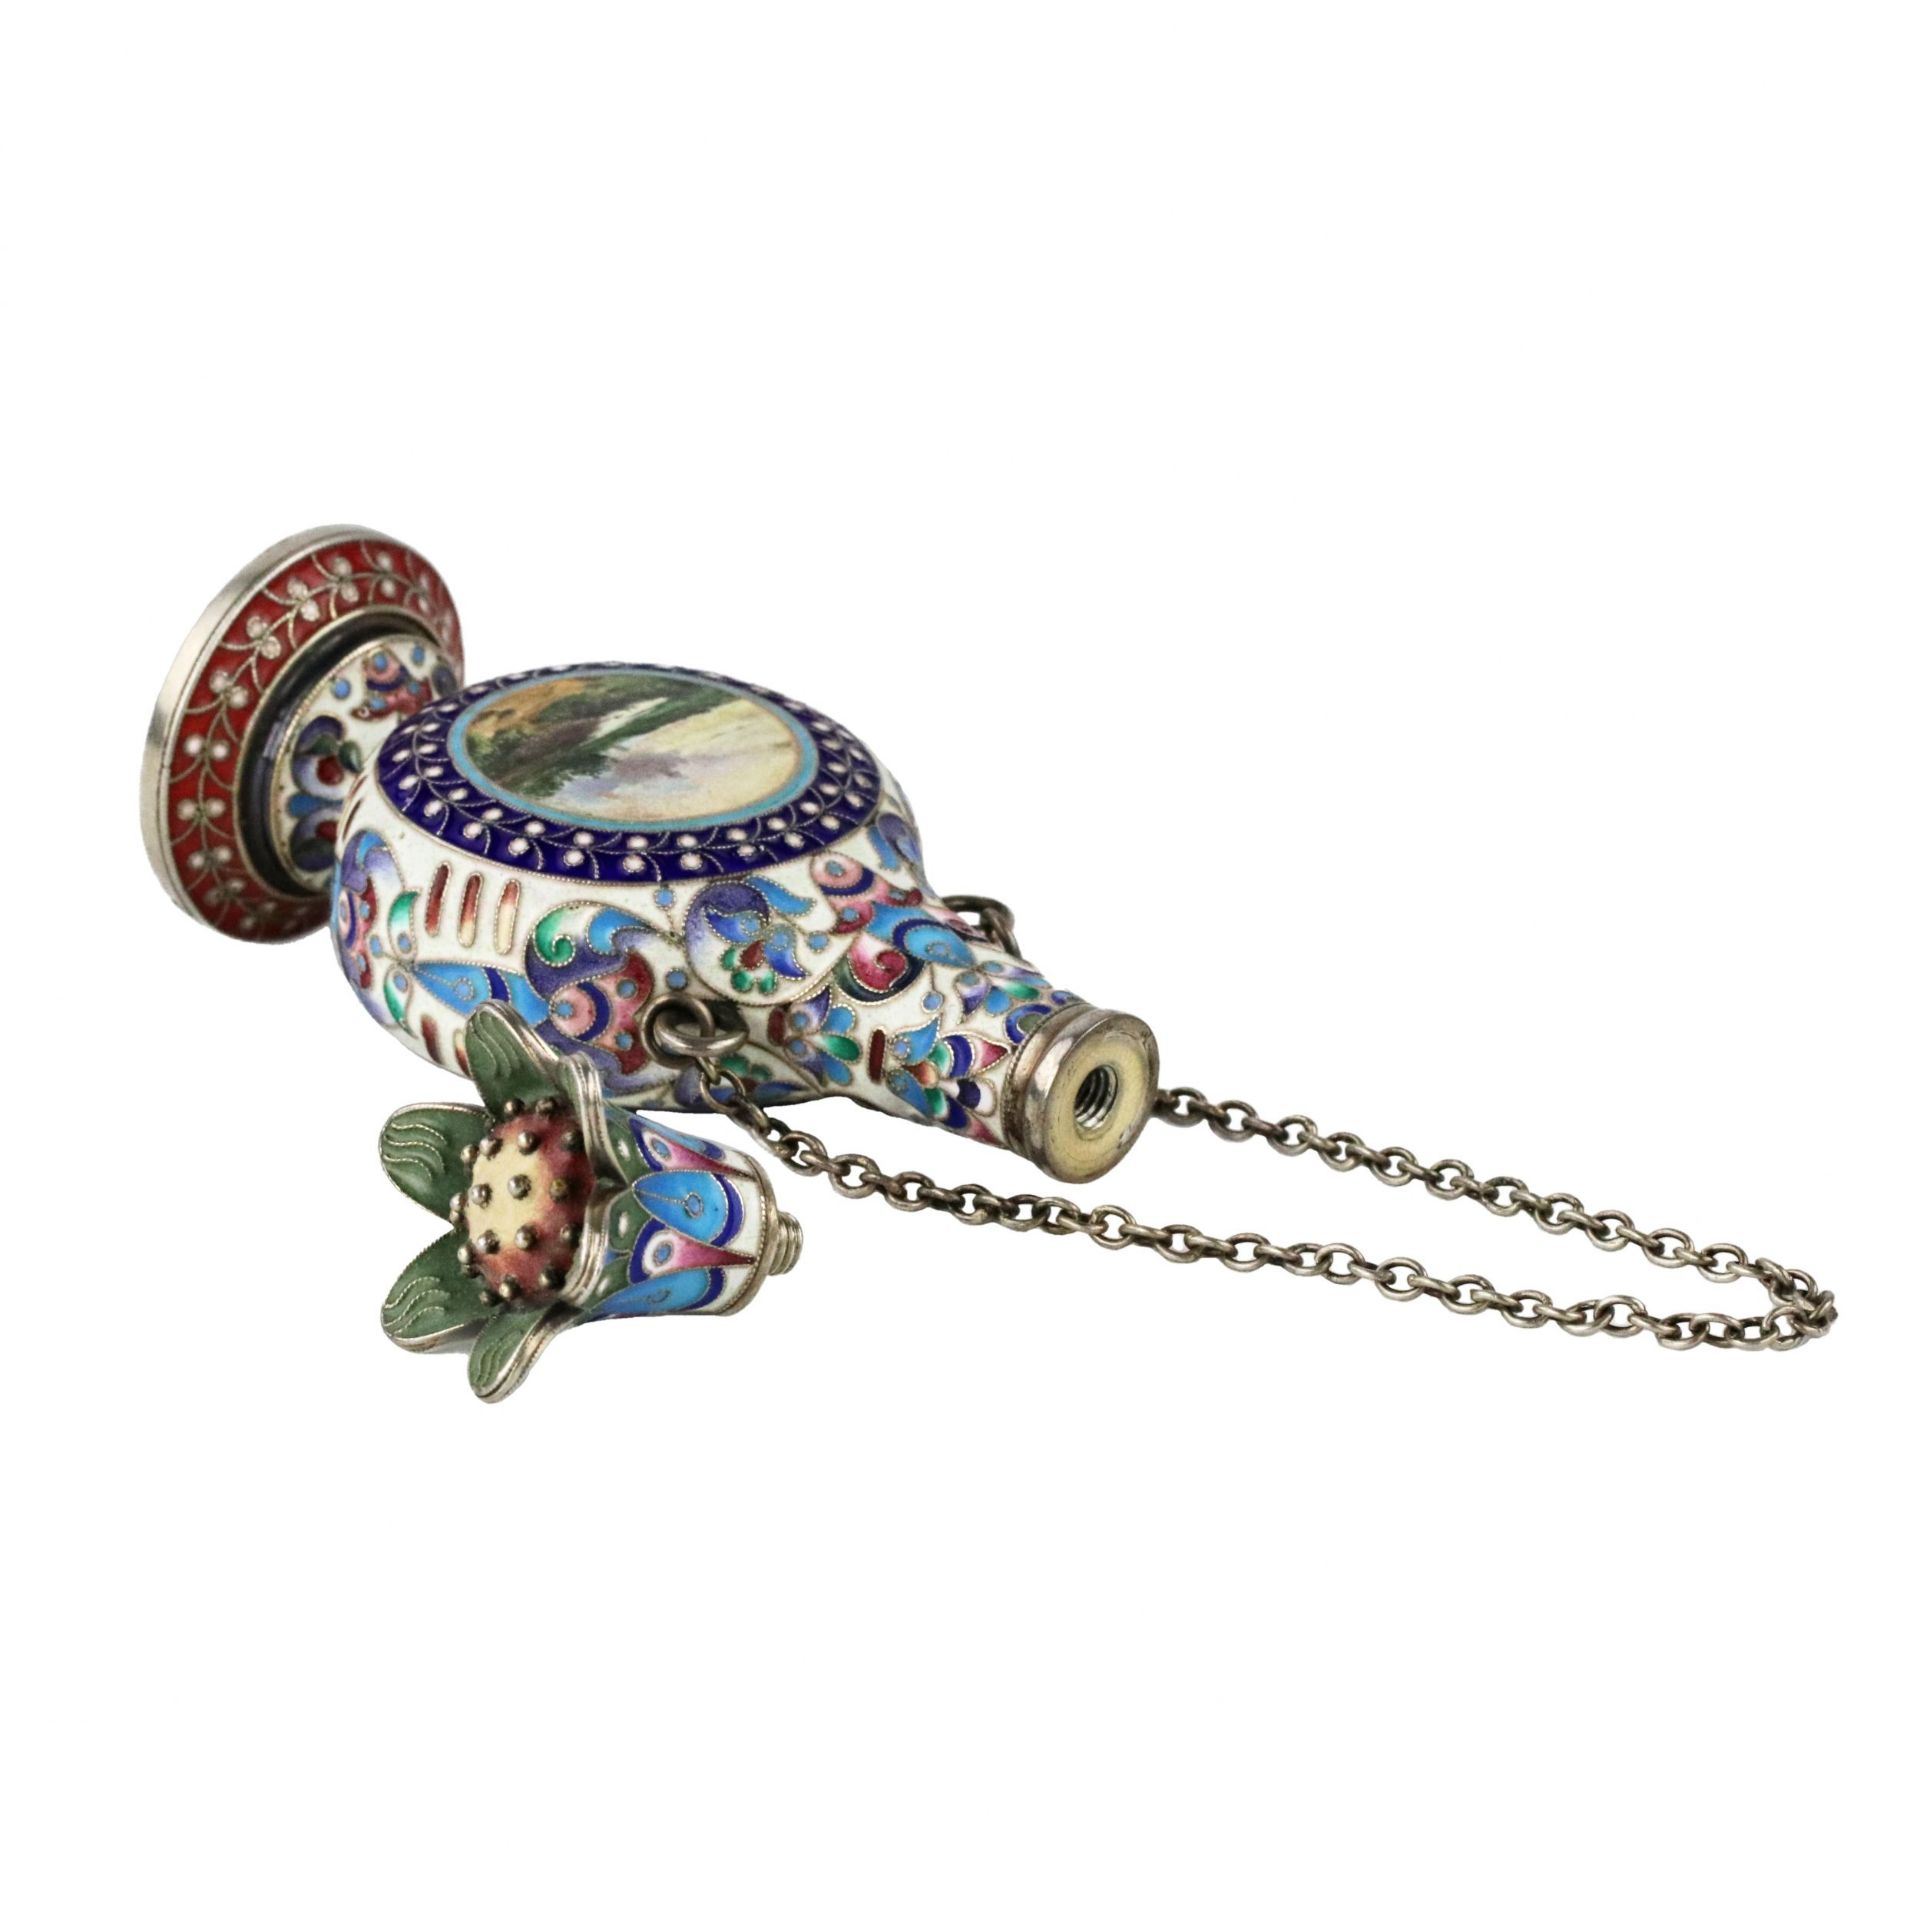 Silver perfume bottle in cloisonne enamel with painted miniatures. - Image 5 of 7